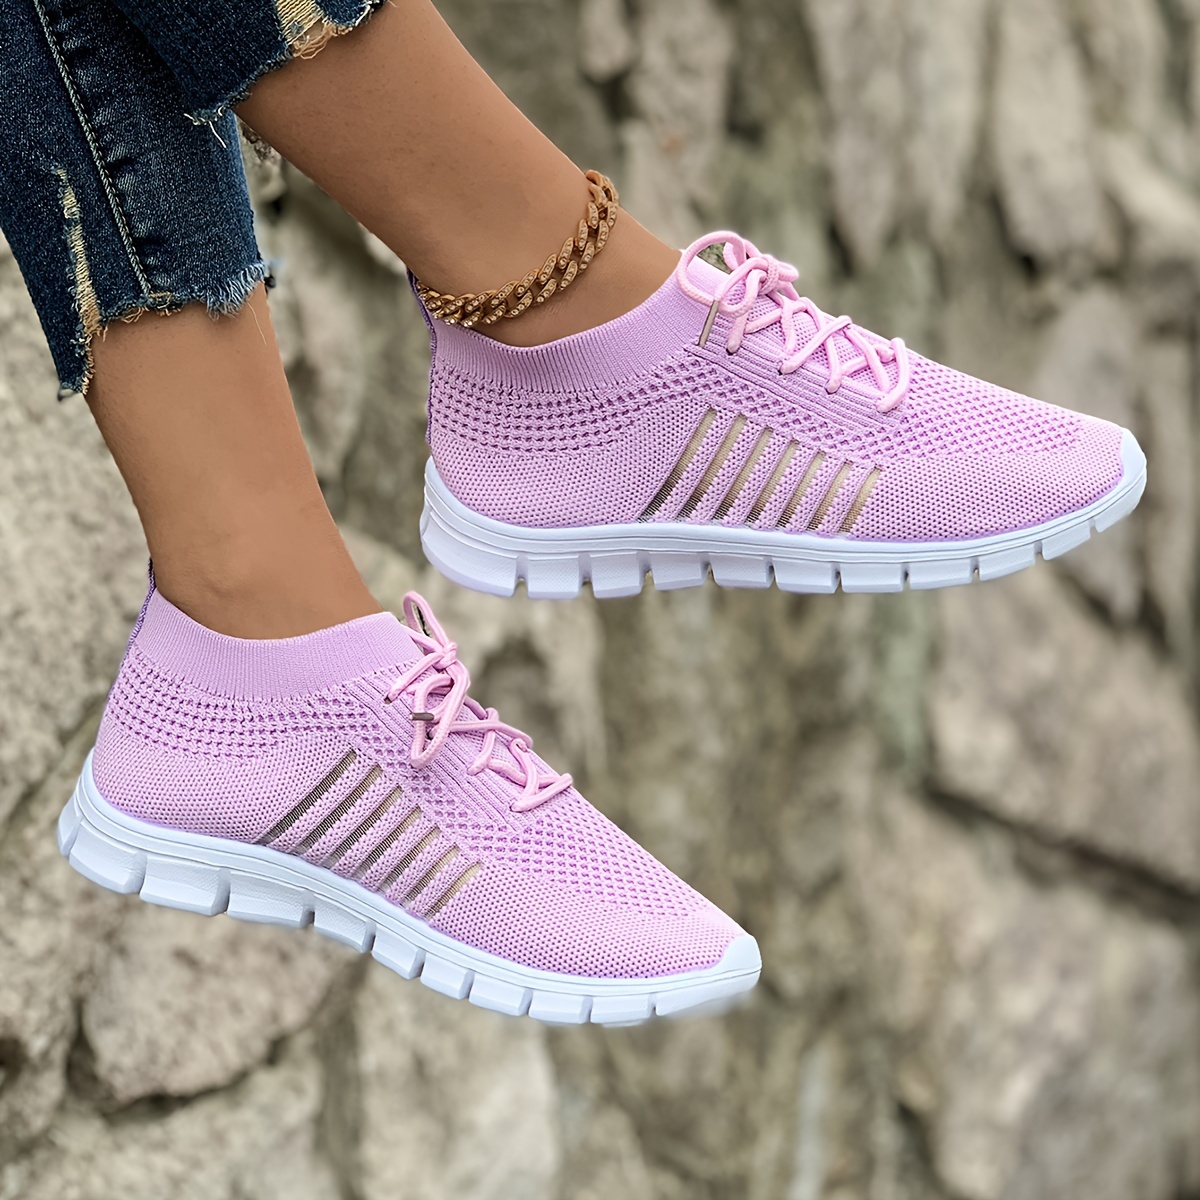 mesh sneakers women s knit lightweight breathable mesh lace details 5